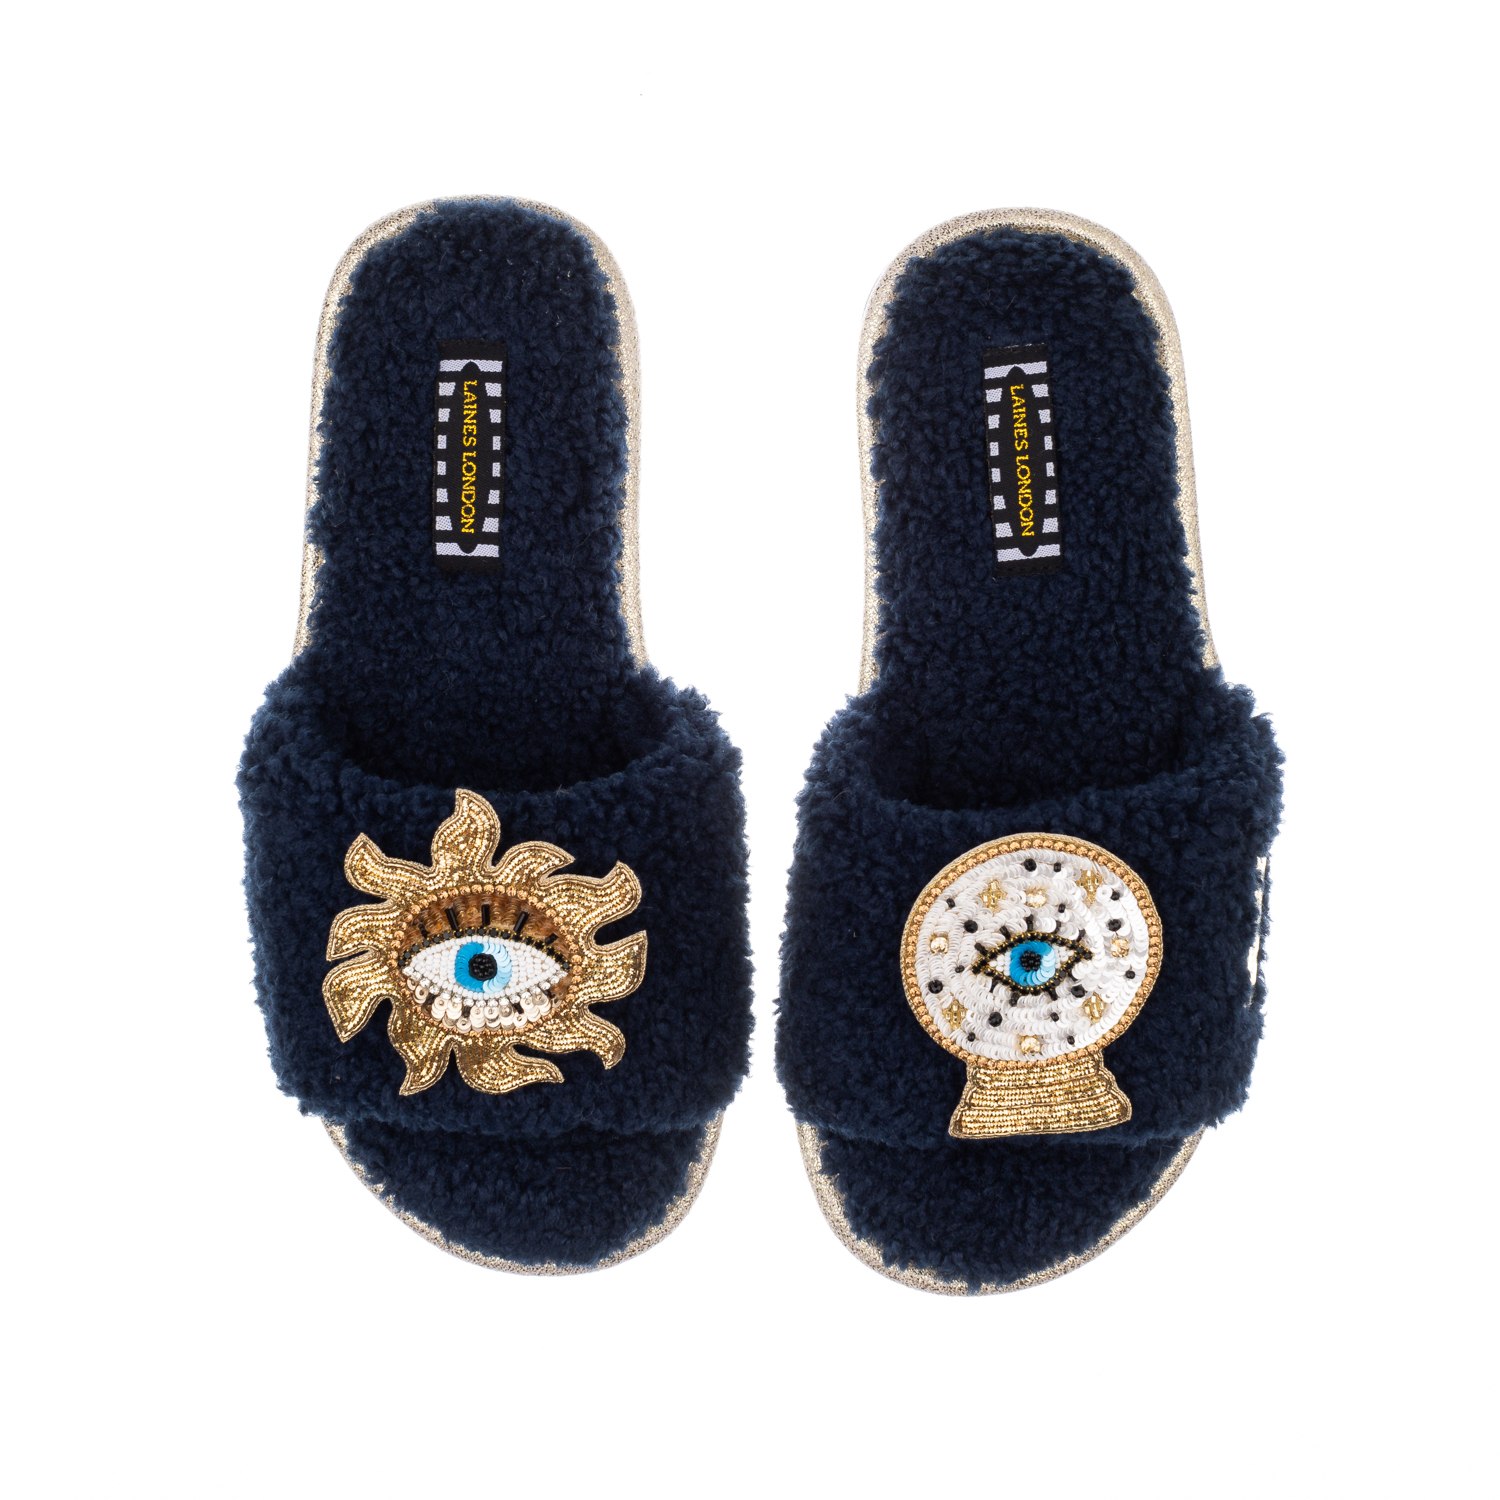 Laines London Women's Blue Teddy Towelling Slipper Sliders With Double Mystic Eye Brooches - Navy